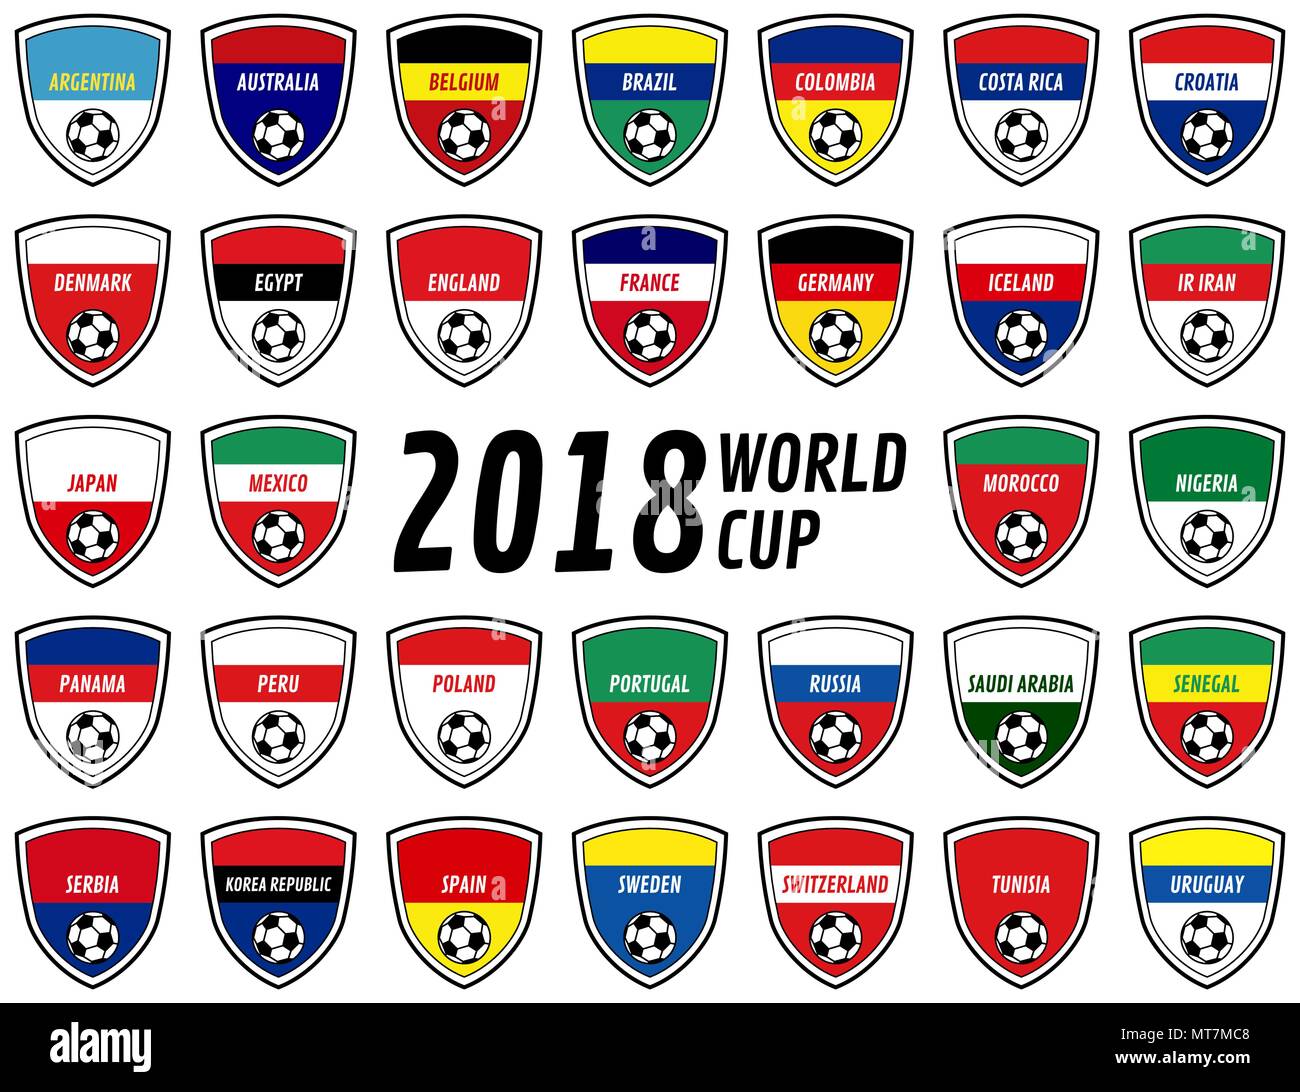 2018 World Cup Russia team badges depicting the colors of the participating countries of qualified teams Stock Vector